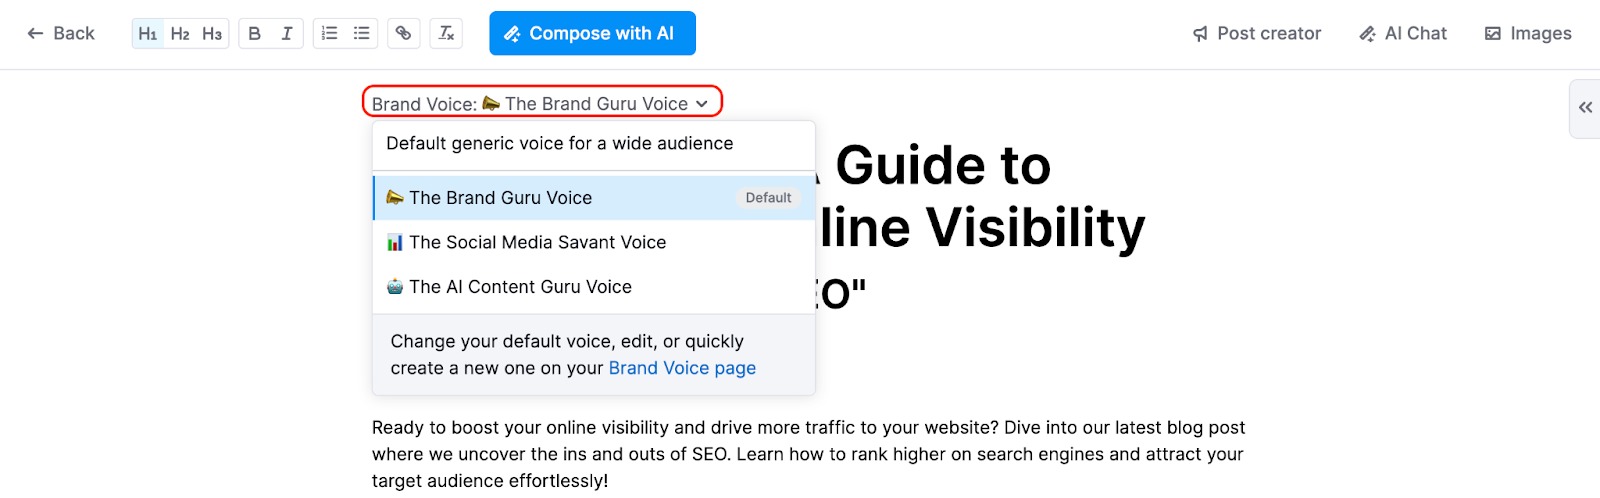 The Brand voice dropdown in the editor highlighted with red.